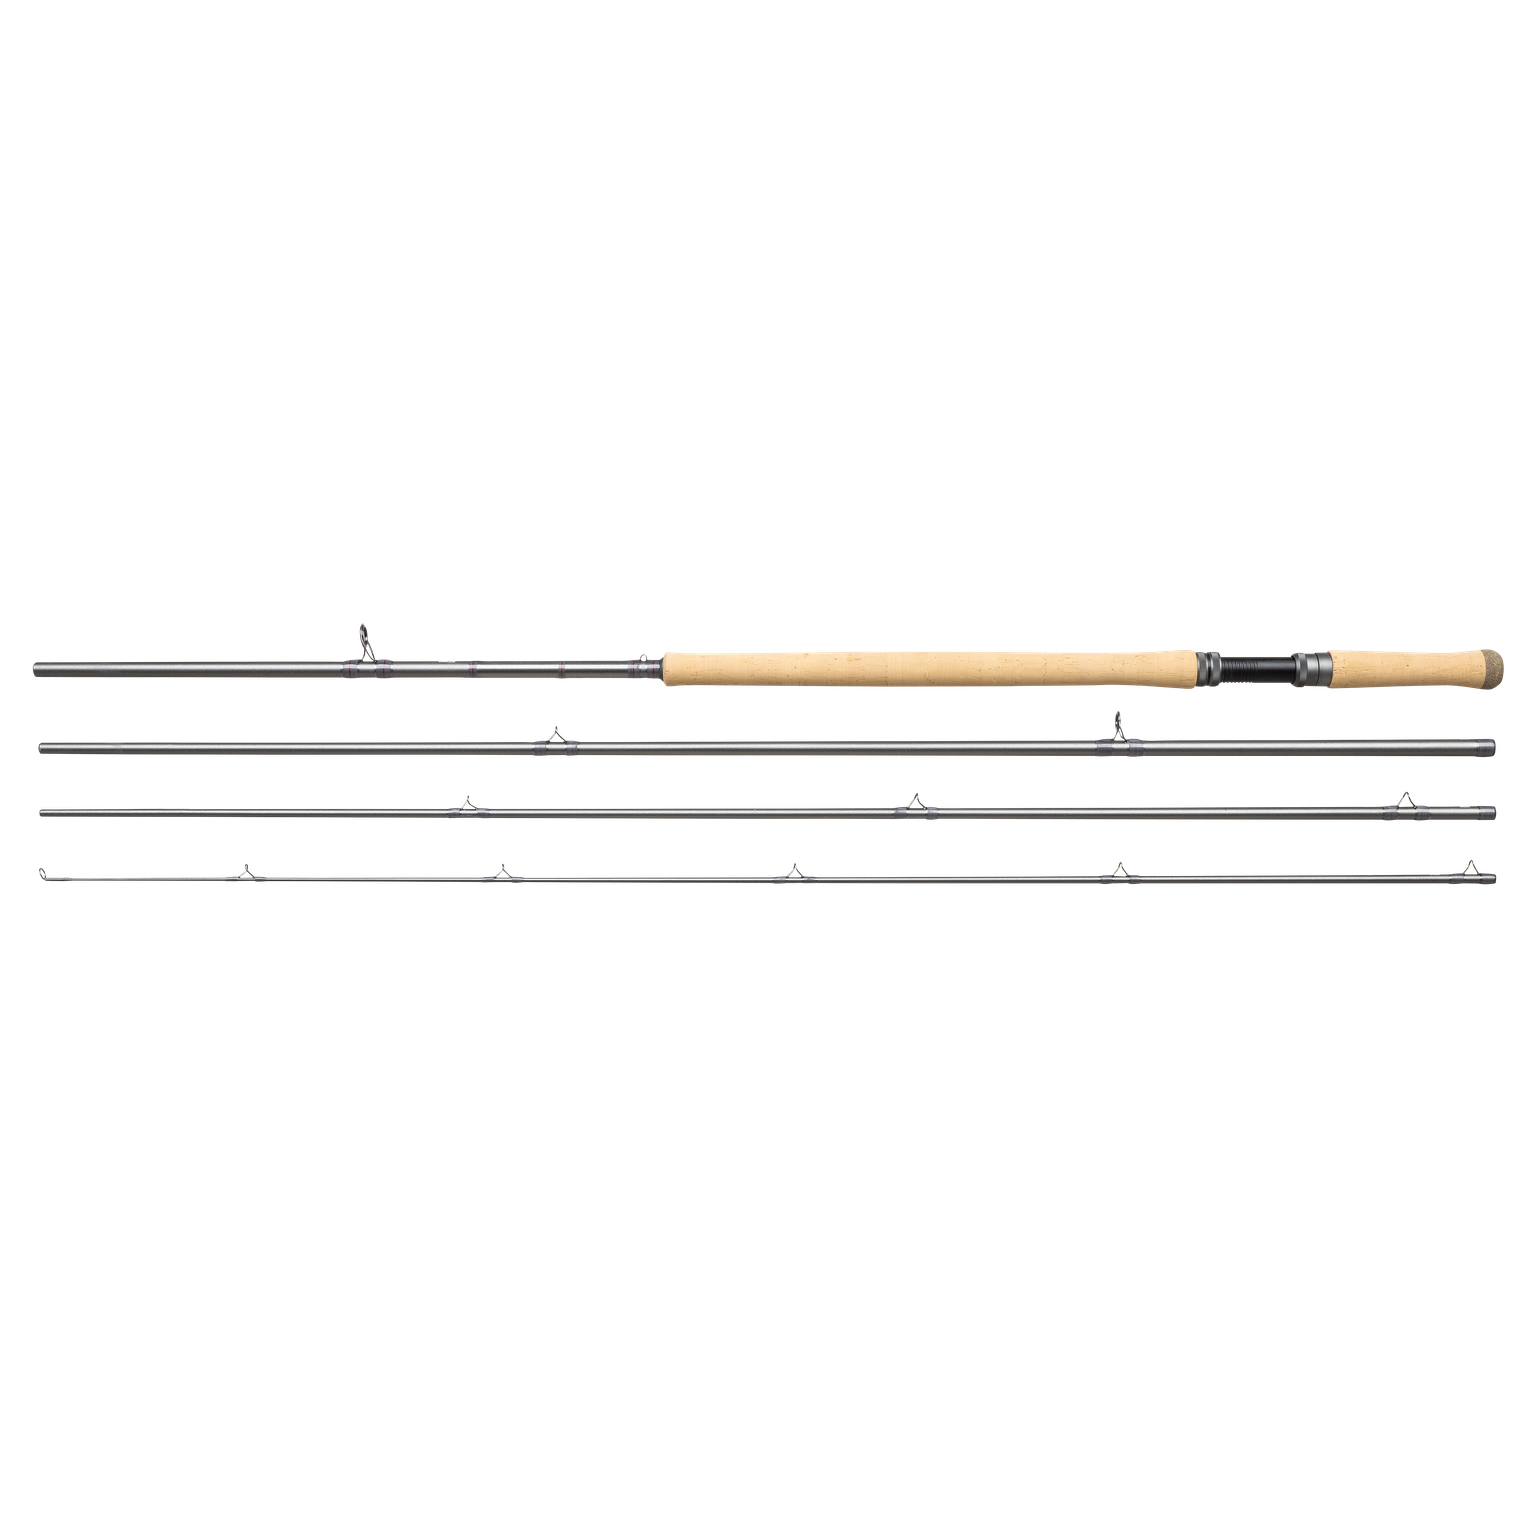 SHAKESPEARE ORACLE 2 SPEY SALMON DH FLY RODS